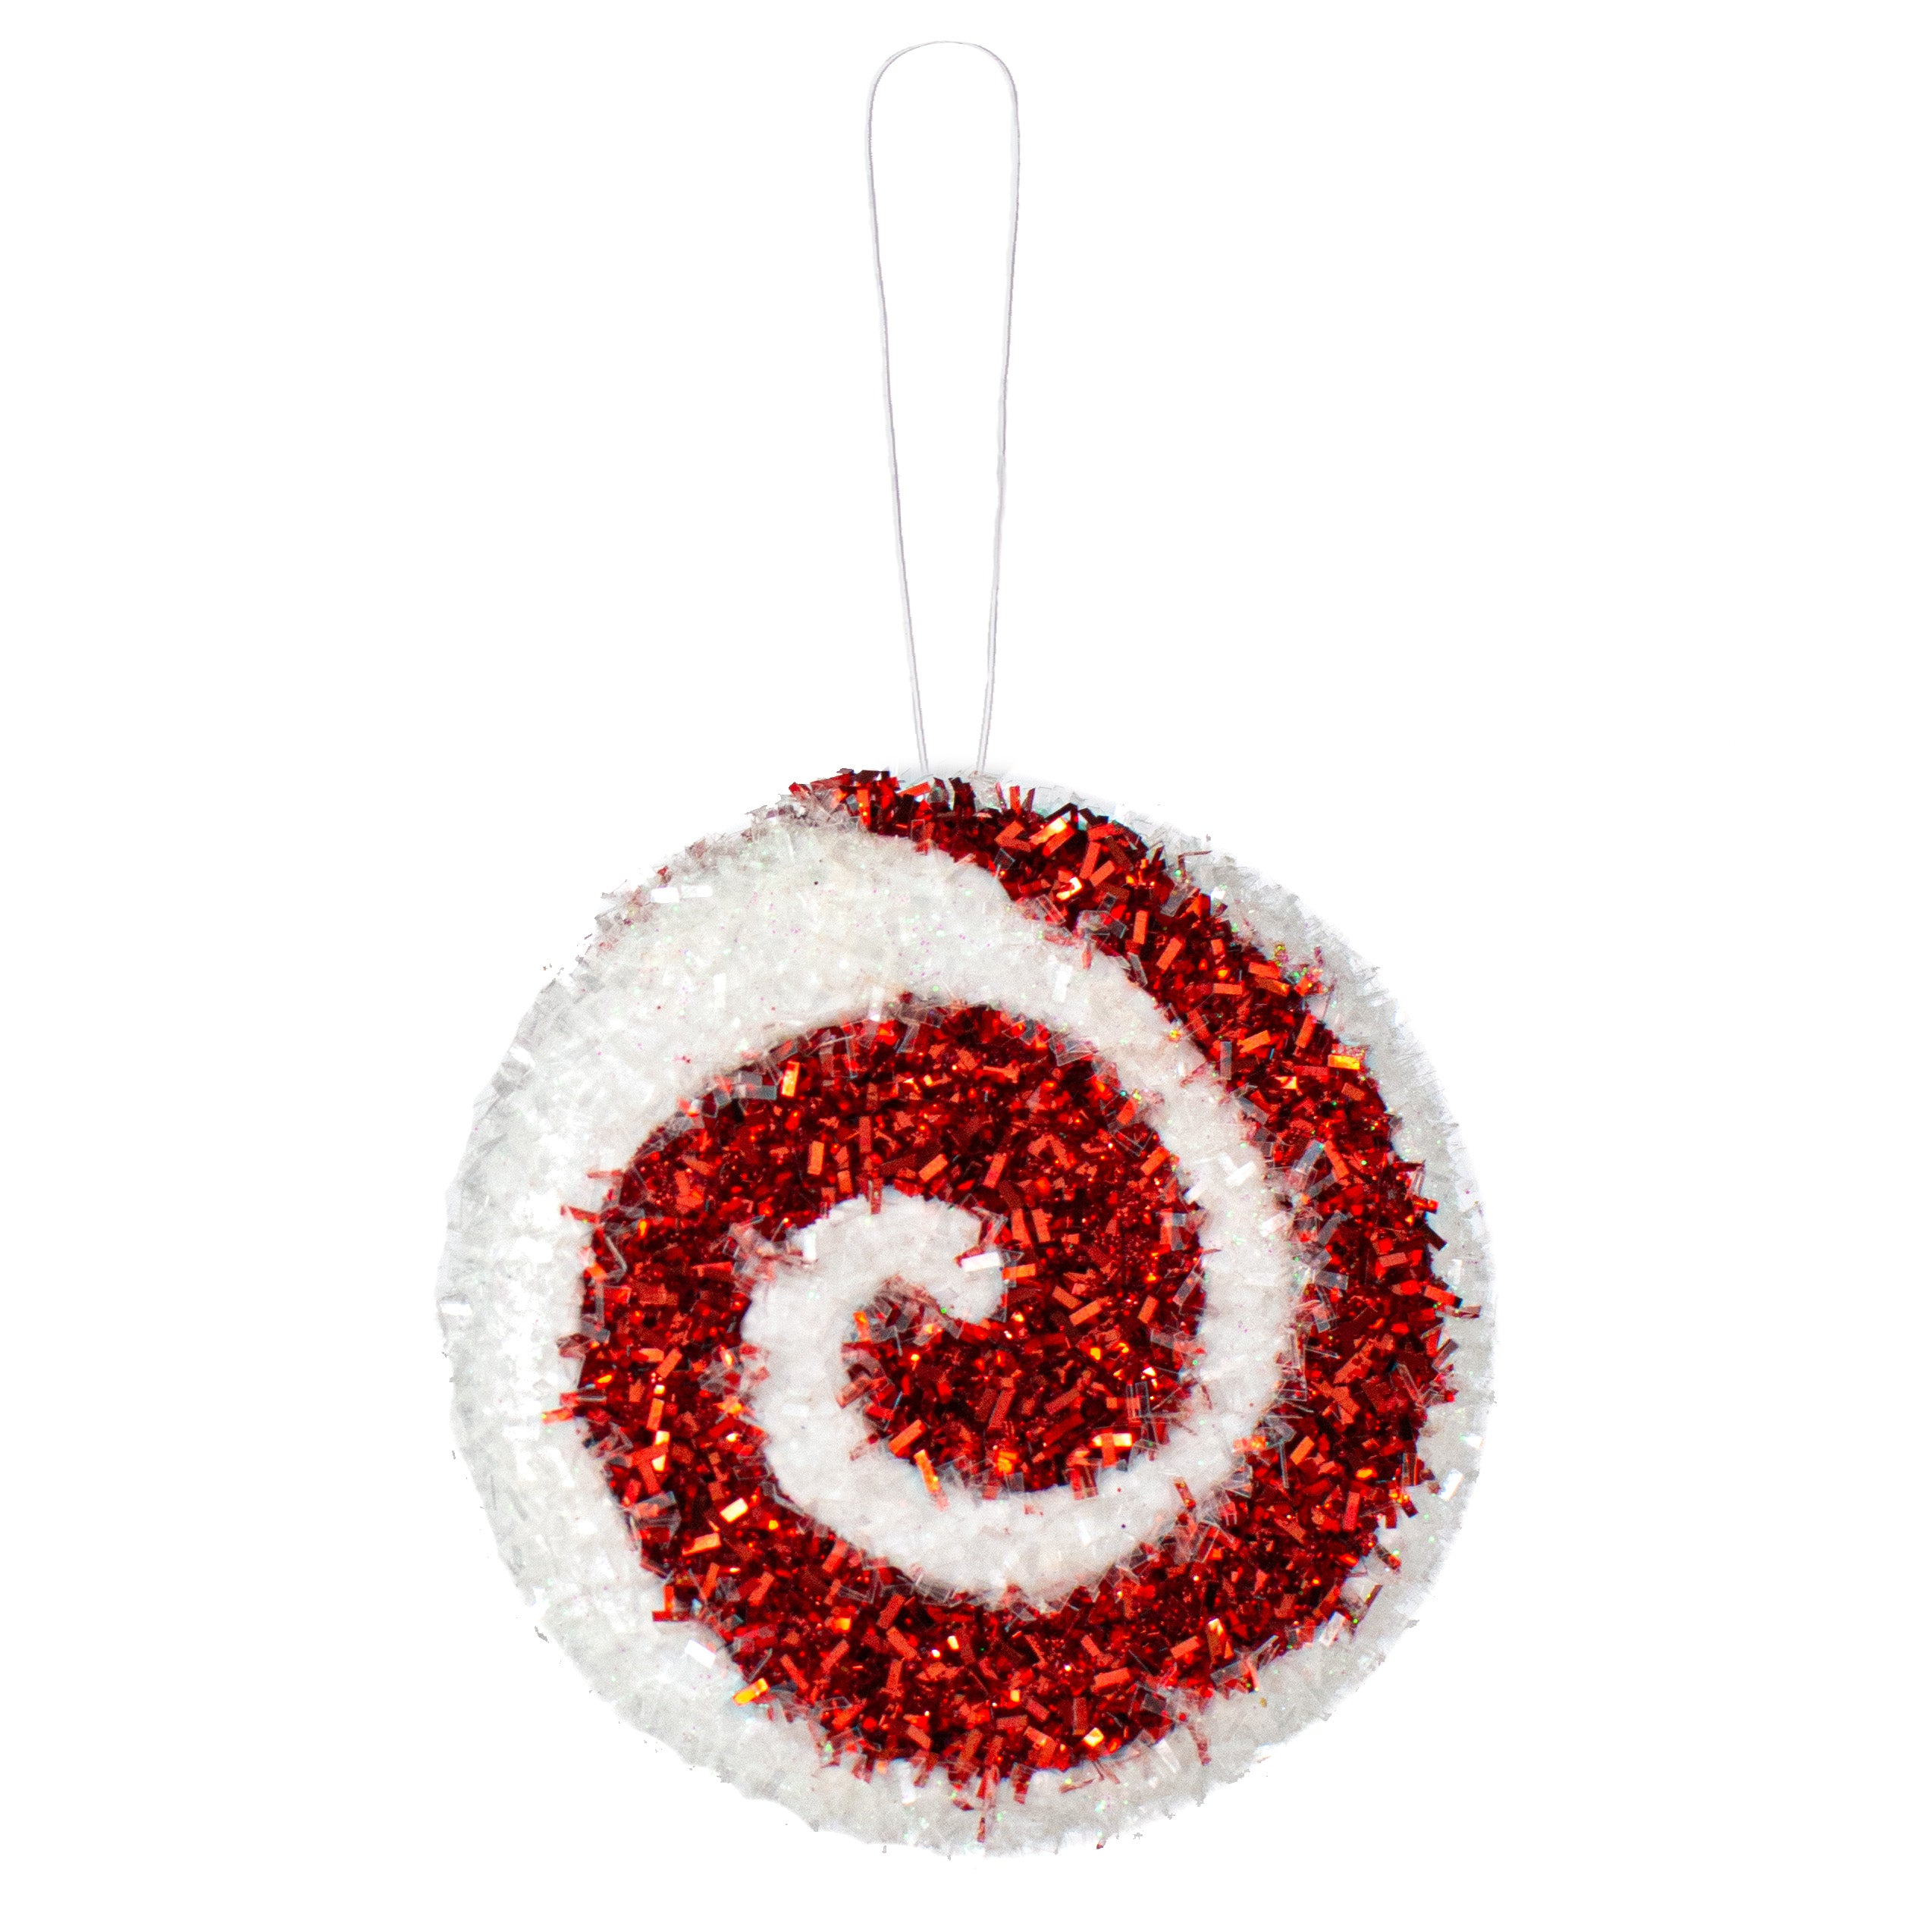 3" Peppermint Candy Ornaments: Red & White (Set of 12)